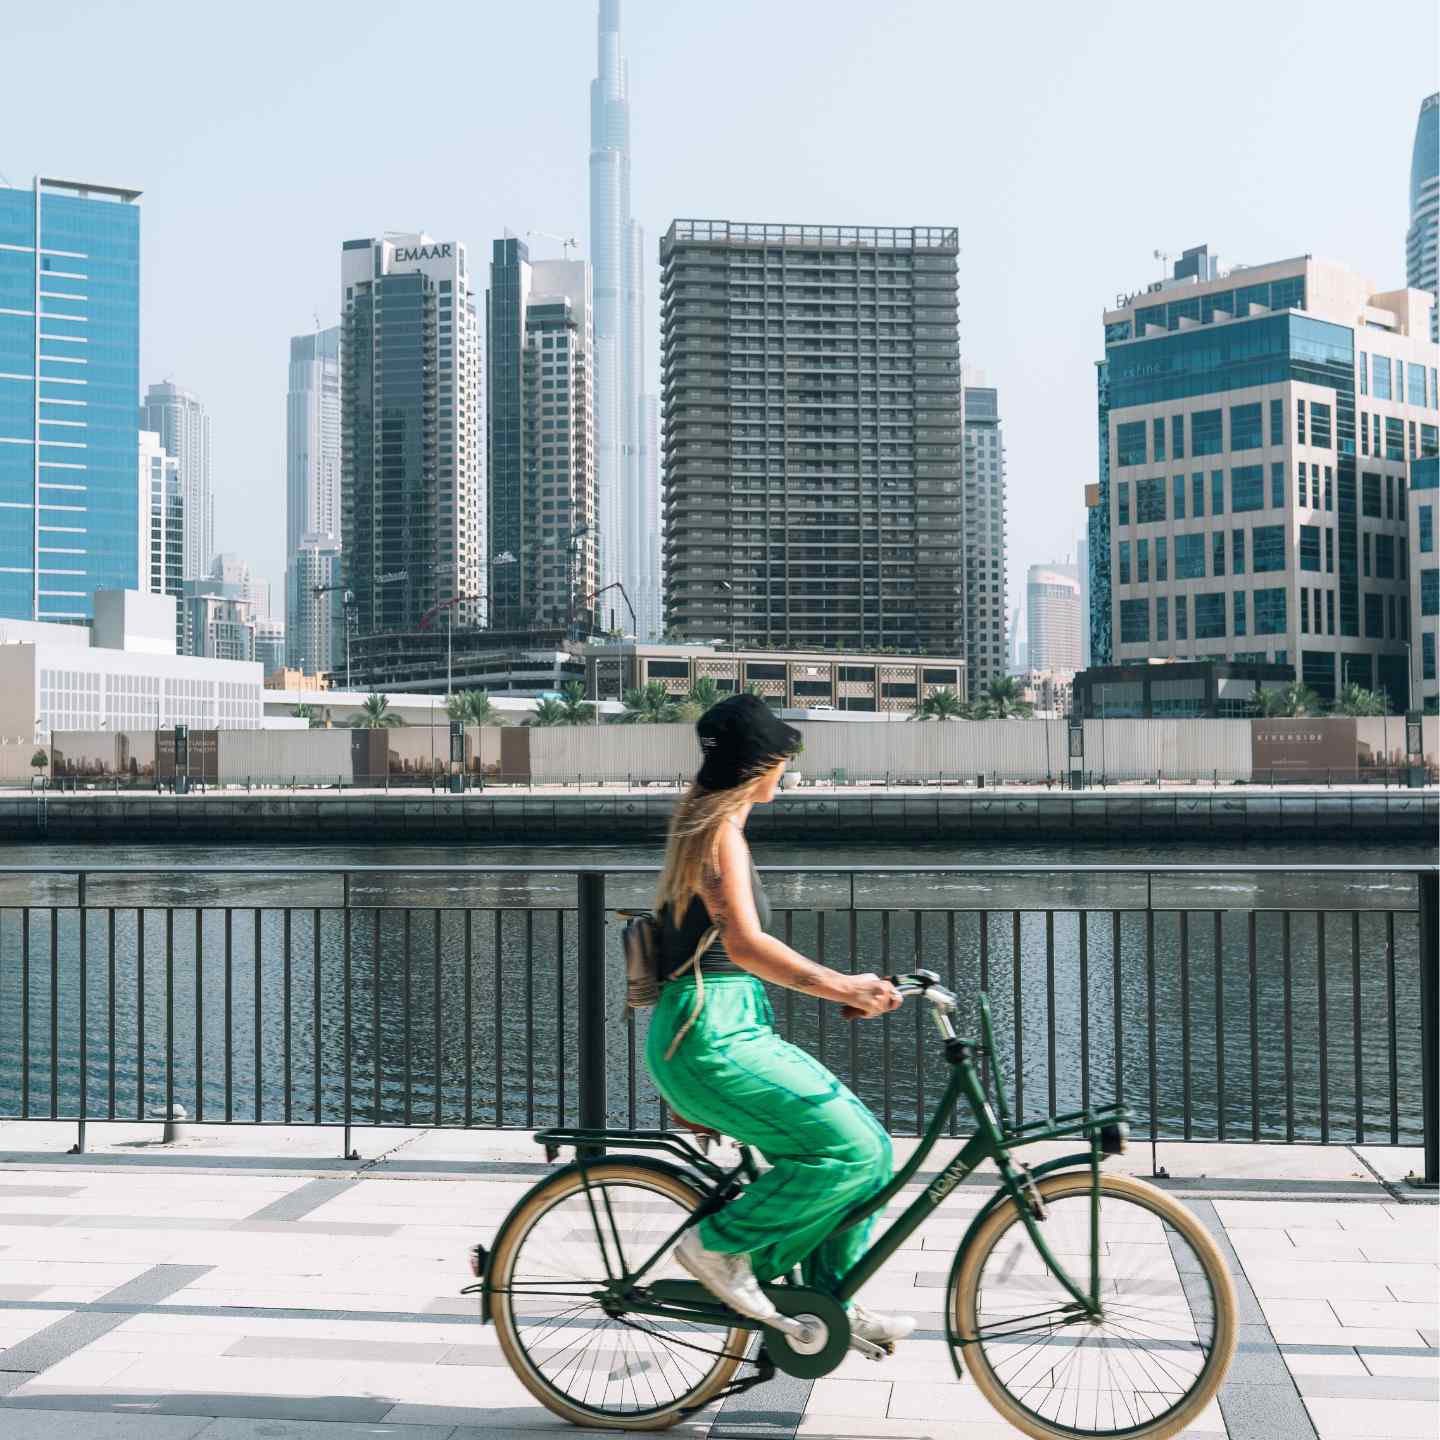 A woman in a bright green skirt riding a bicycle along the Dubai waterfront with a canal and high rise buildings in the background